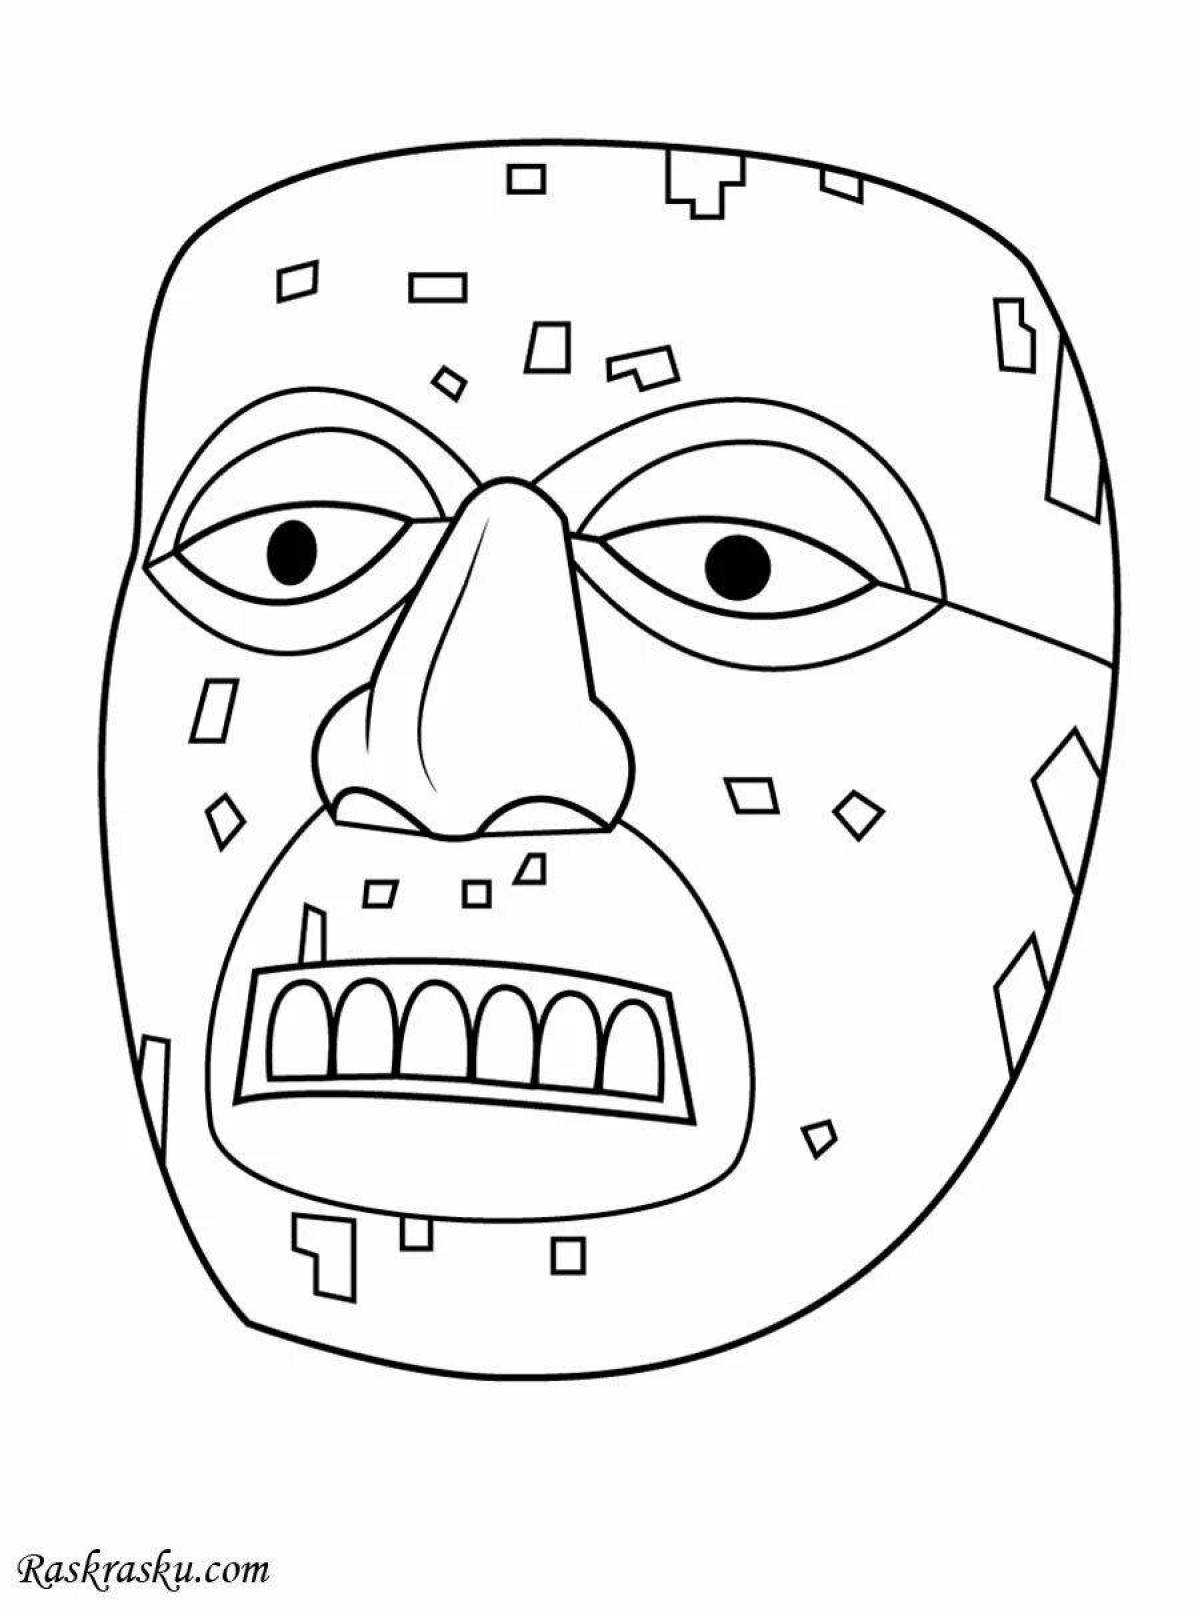 Glowing ice cream mask coloring page